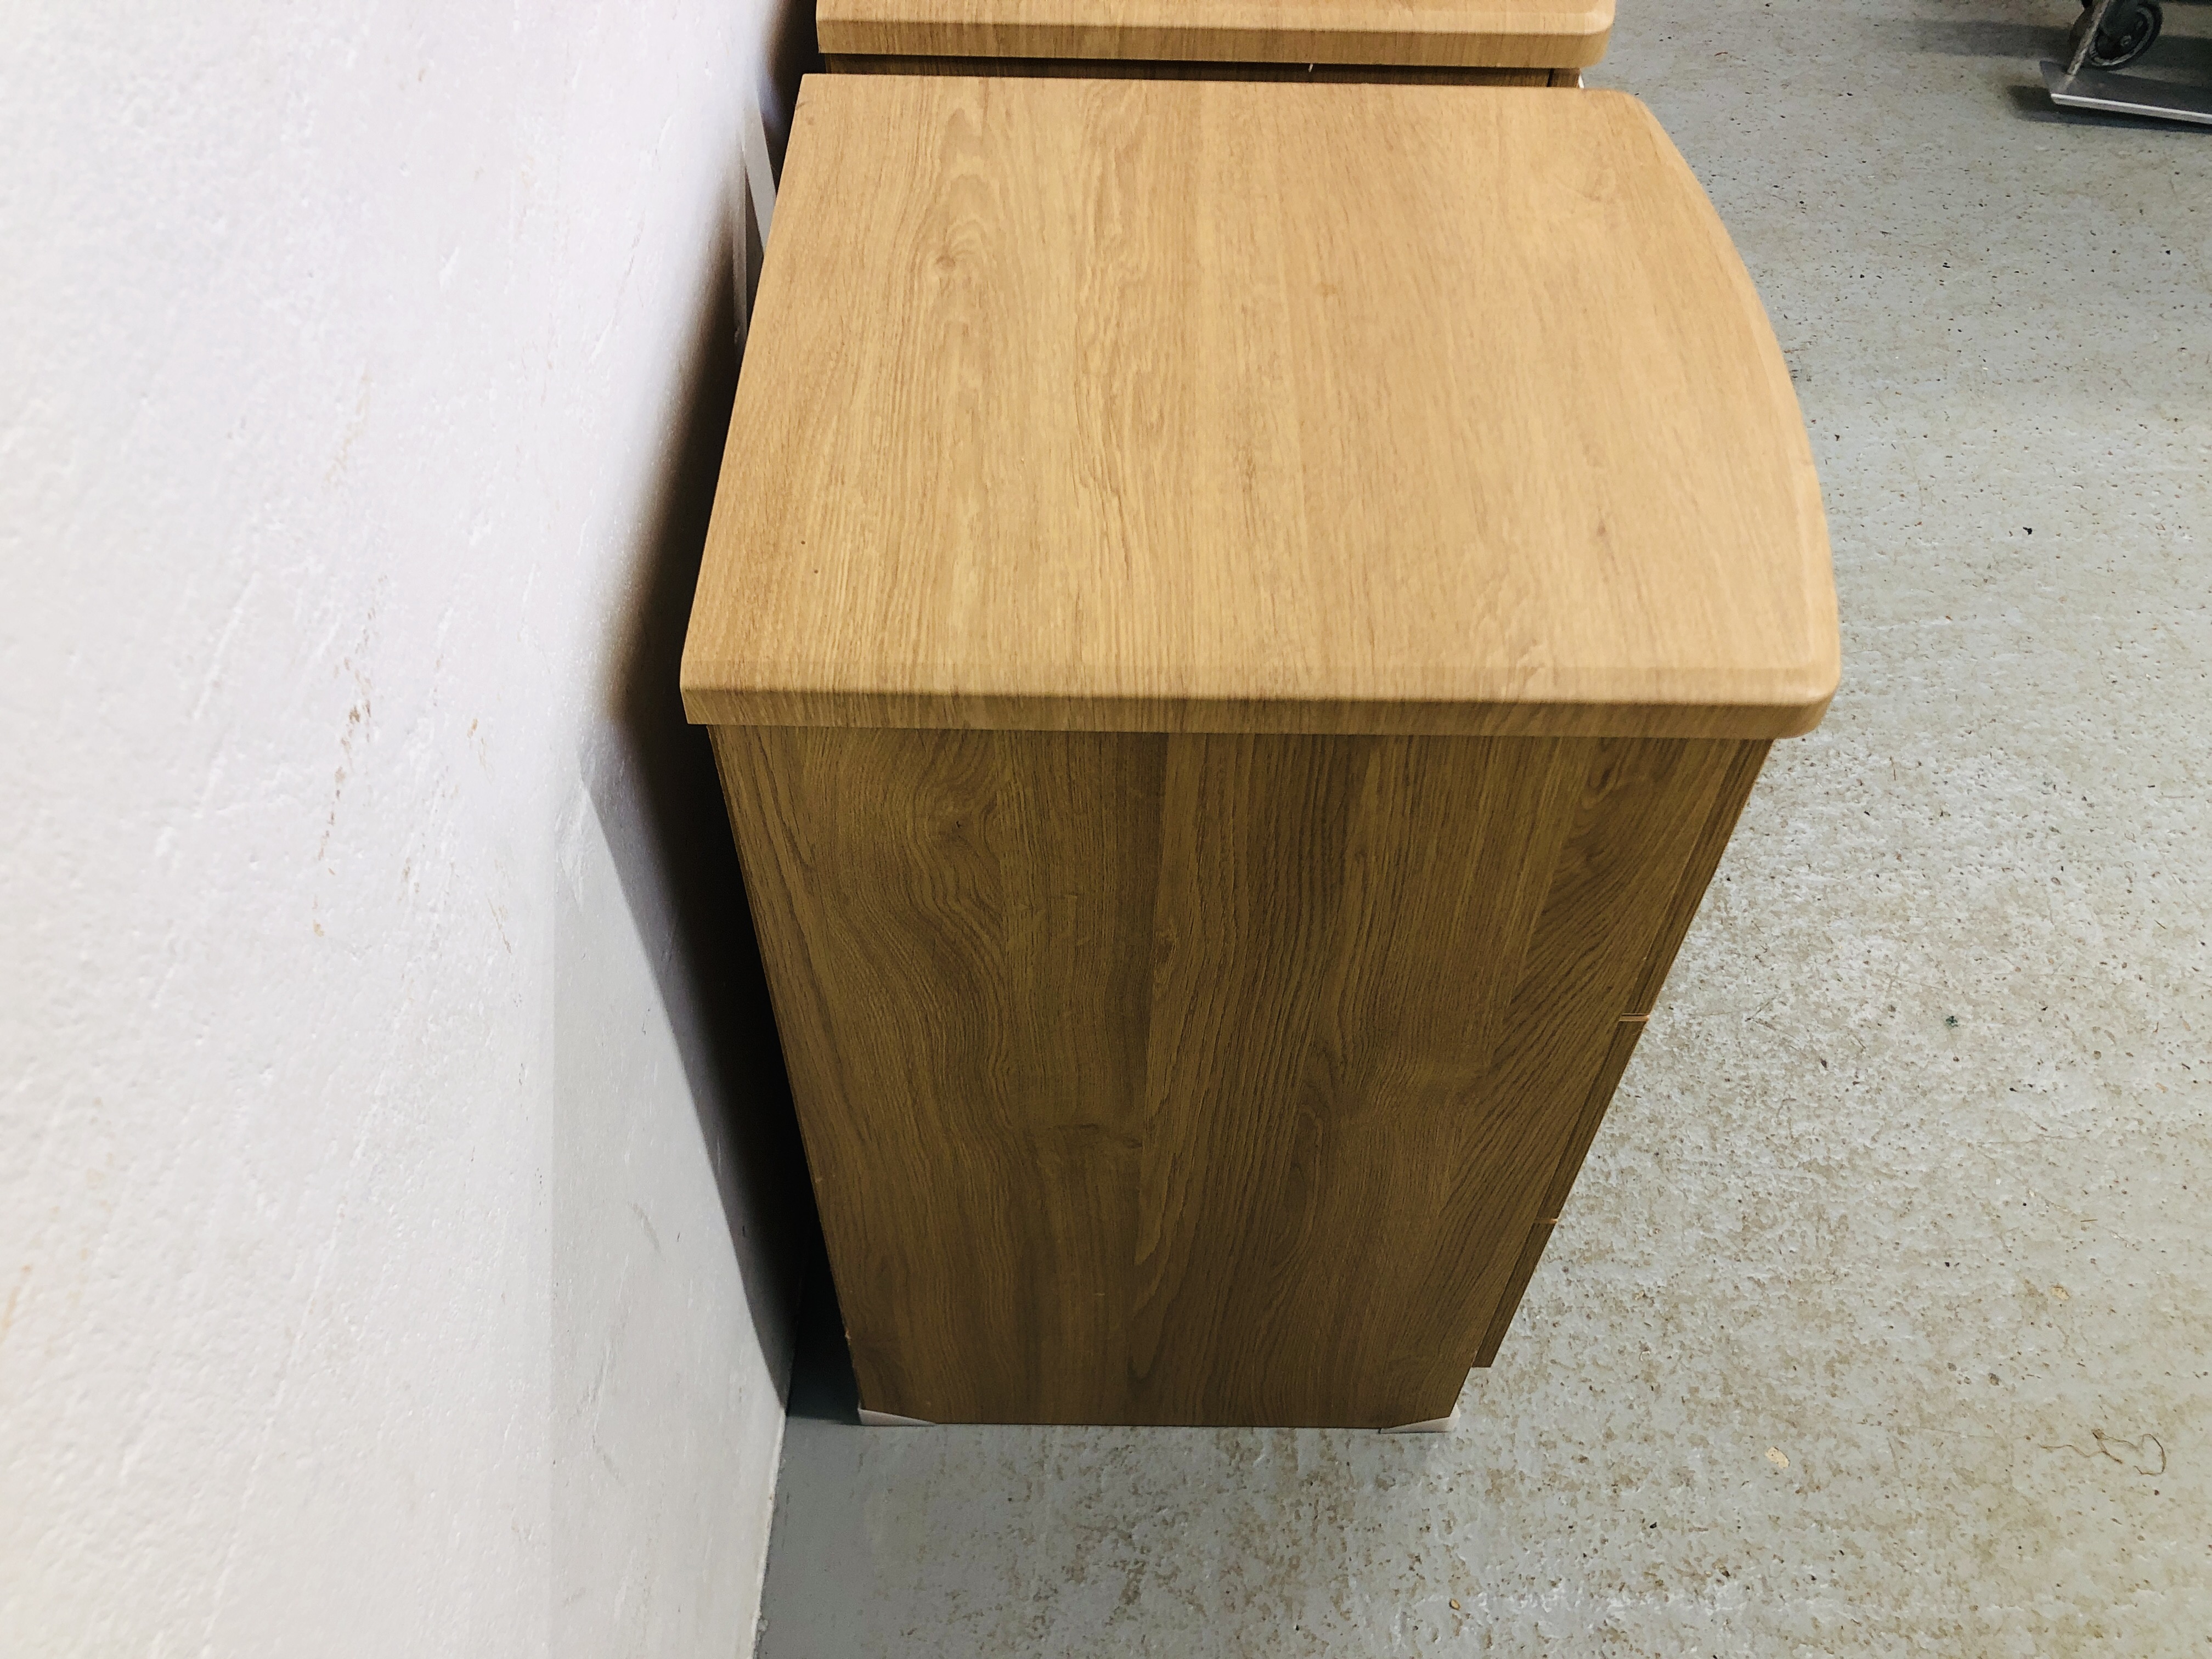 PAIR OF MODERN LIGHT OAK FINISH THREE DRAWER BEDSIDE CHESTS - Image 5 of 6